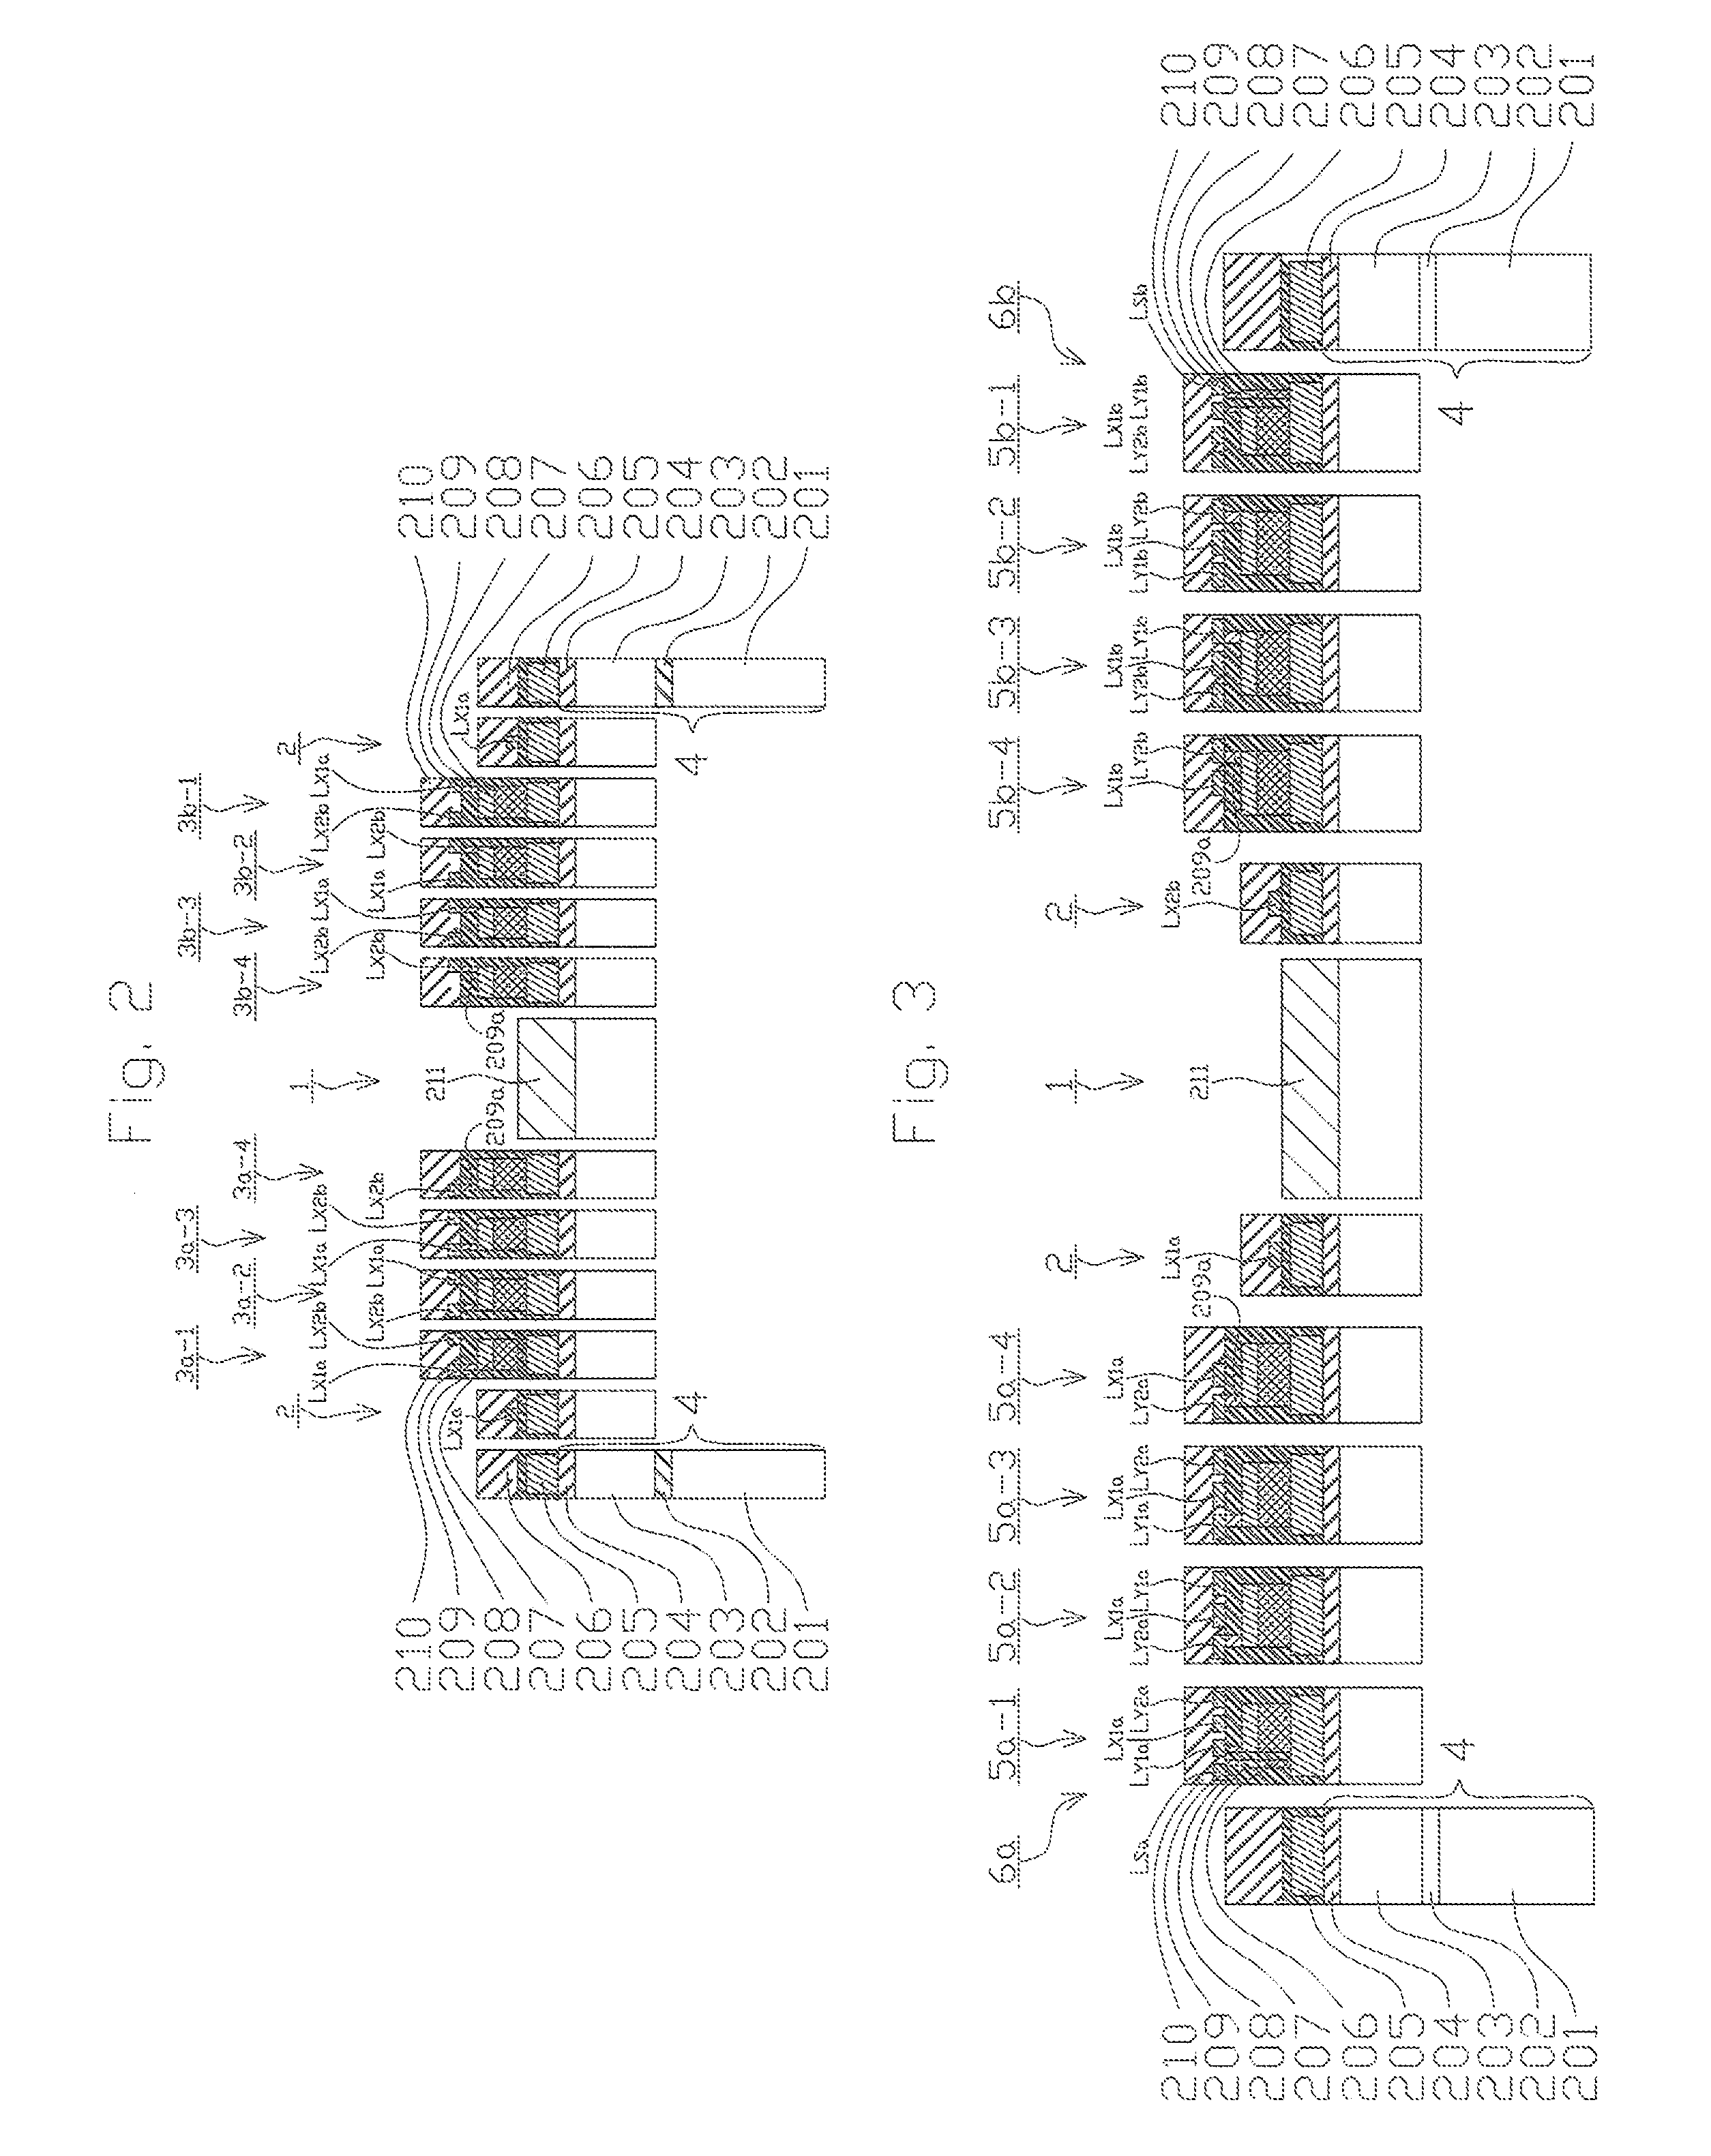 Optical deflector including piezoelectric sensor incorporated into outermost piezoelectric cantilever